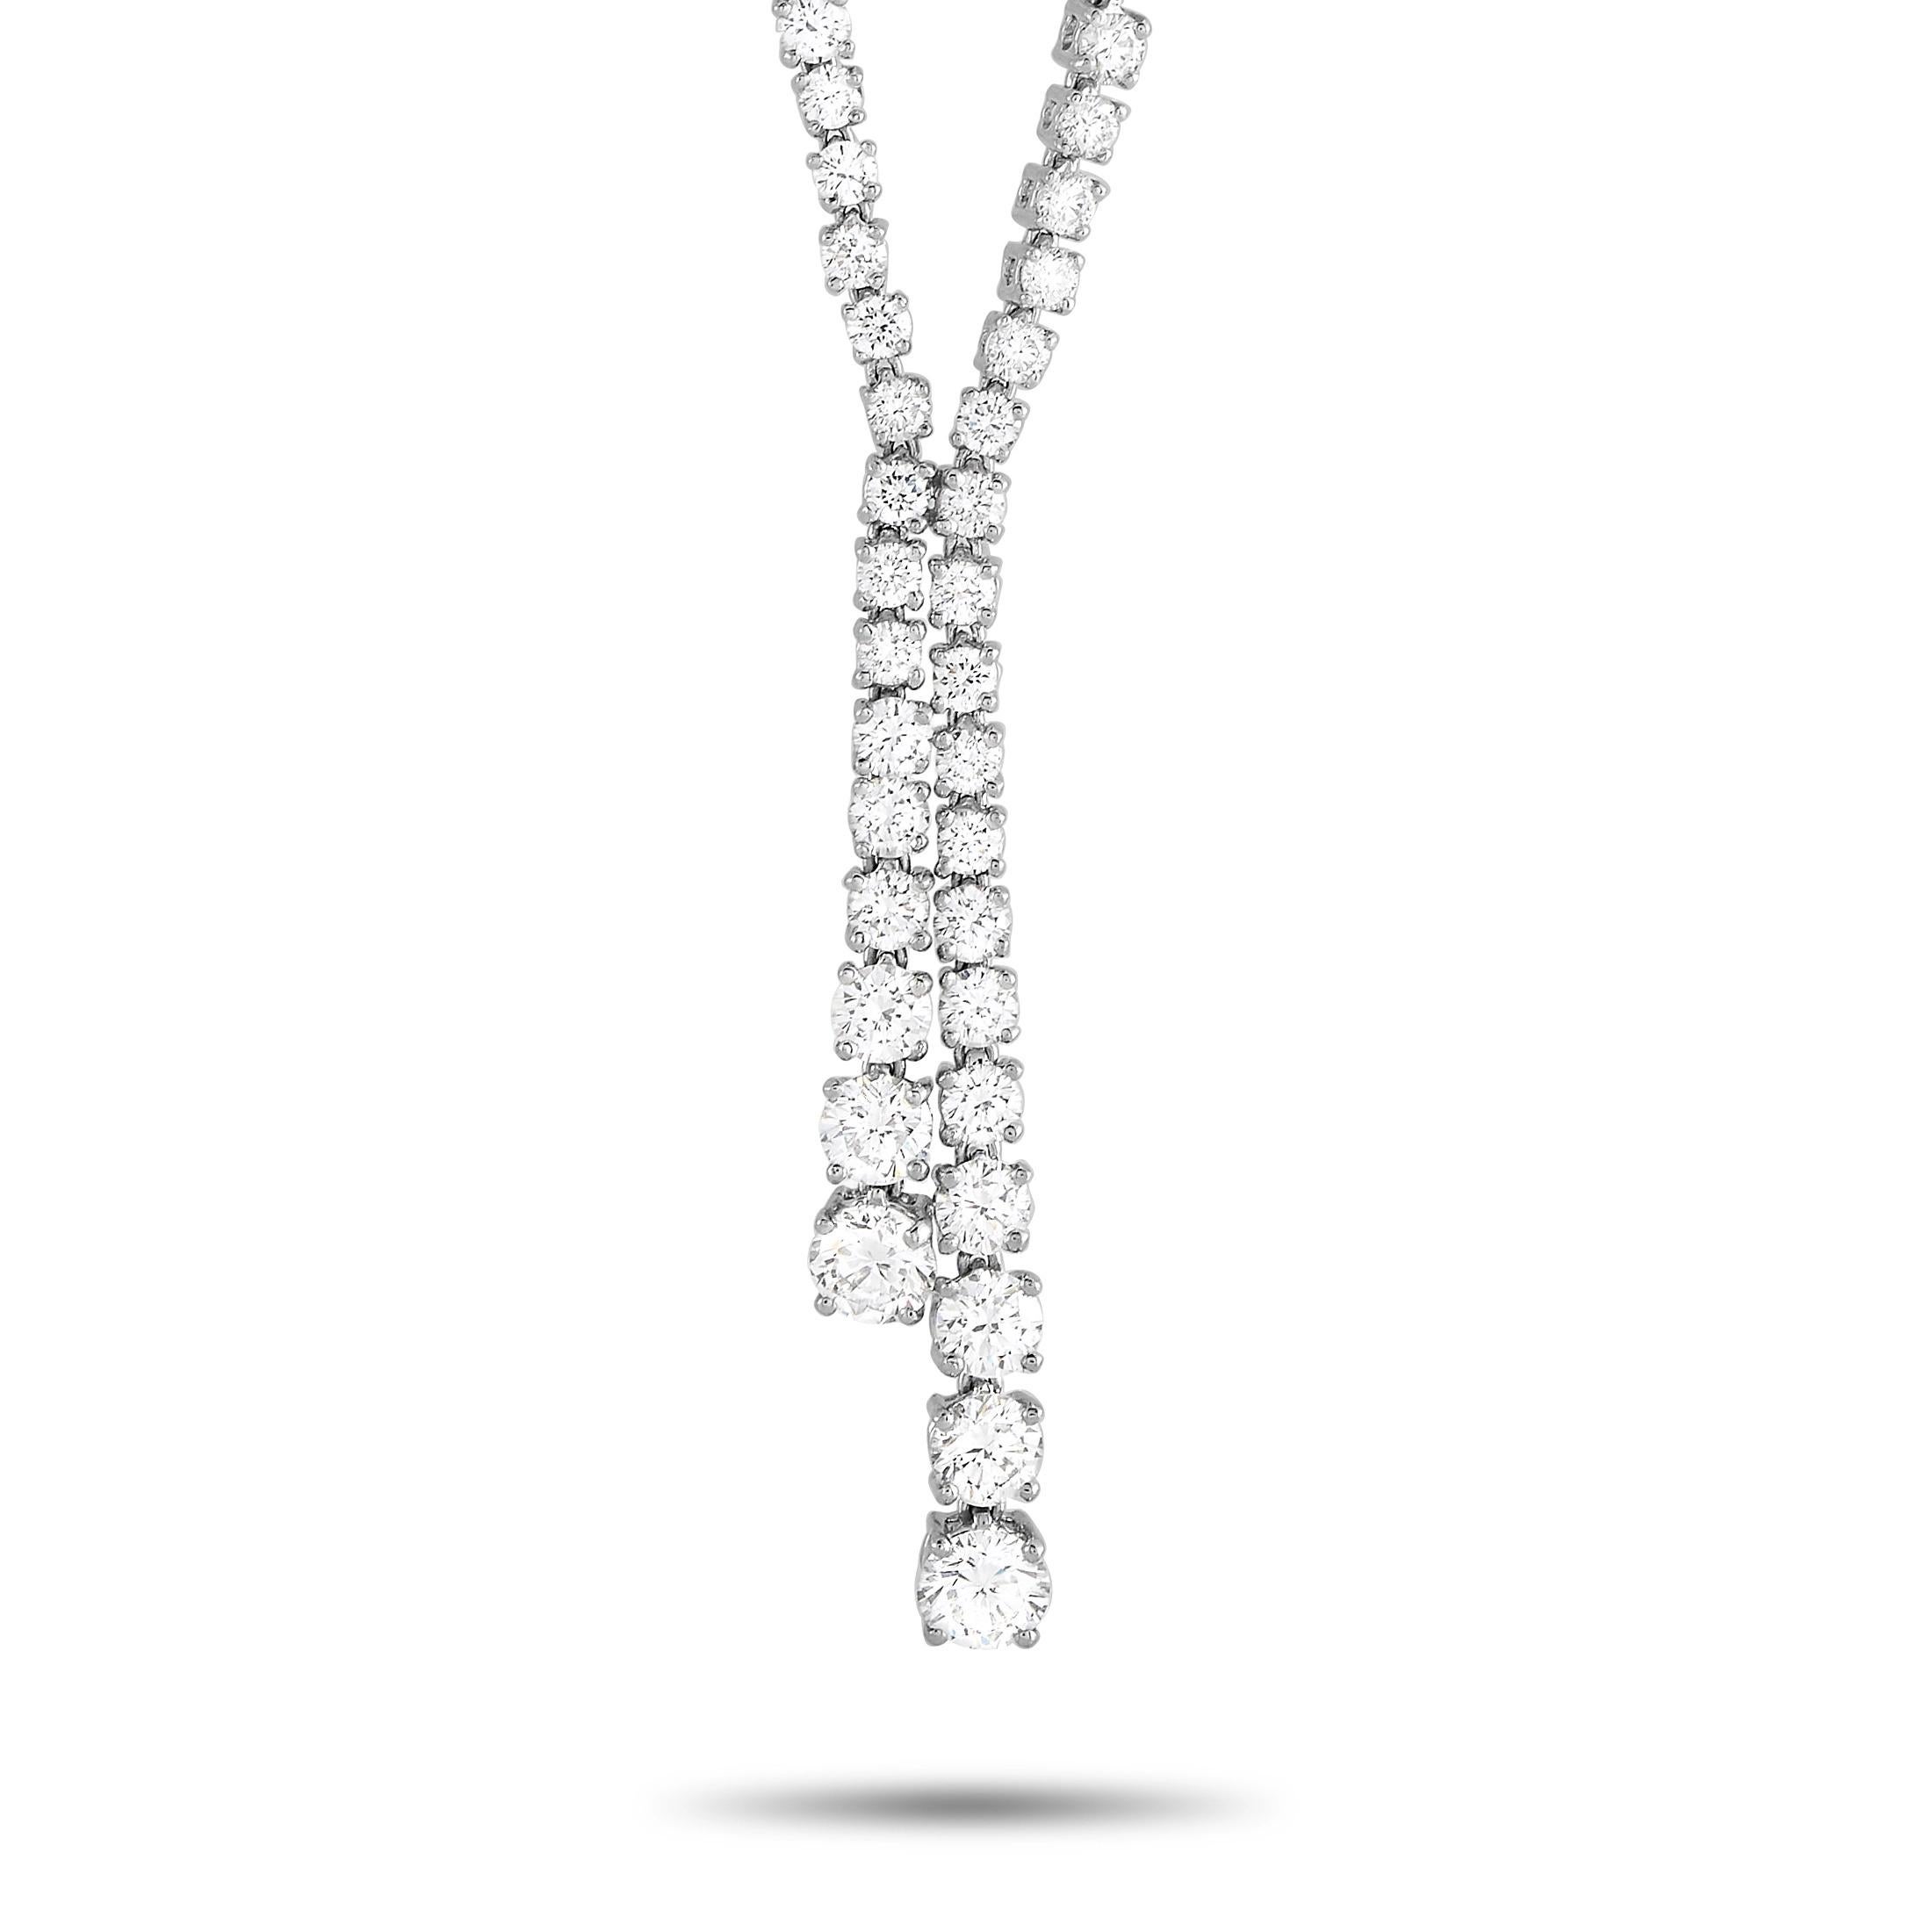 Sleek, simple, and endlessly stylish, this necklace from Graff is perfect for any special occasion. On this piece, you’ll find an understated double-strand pendant measuring 1.75” long and 0.75” wide. The entire 15” chain and elegant pendant are